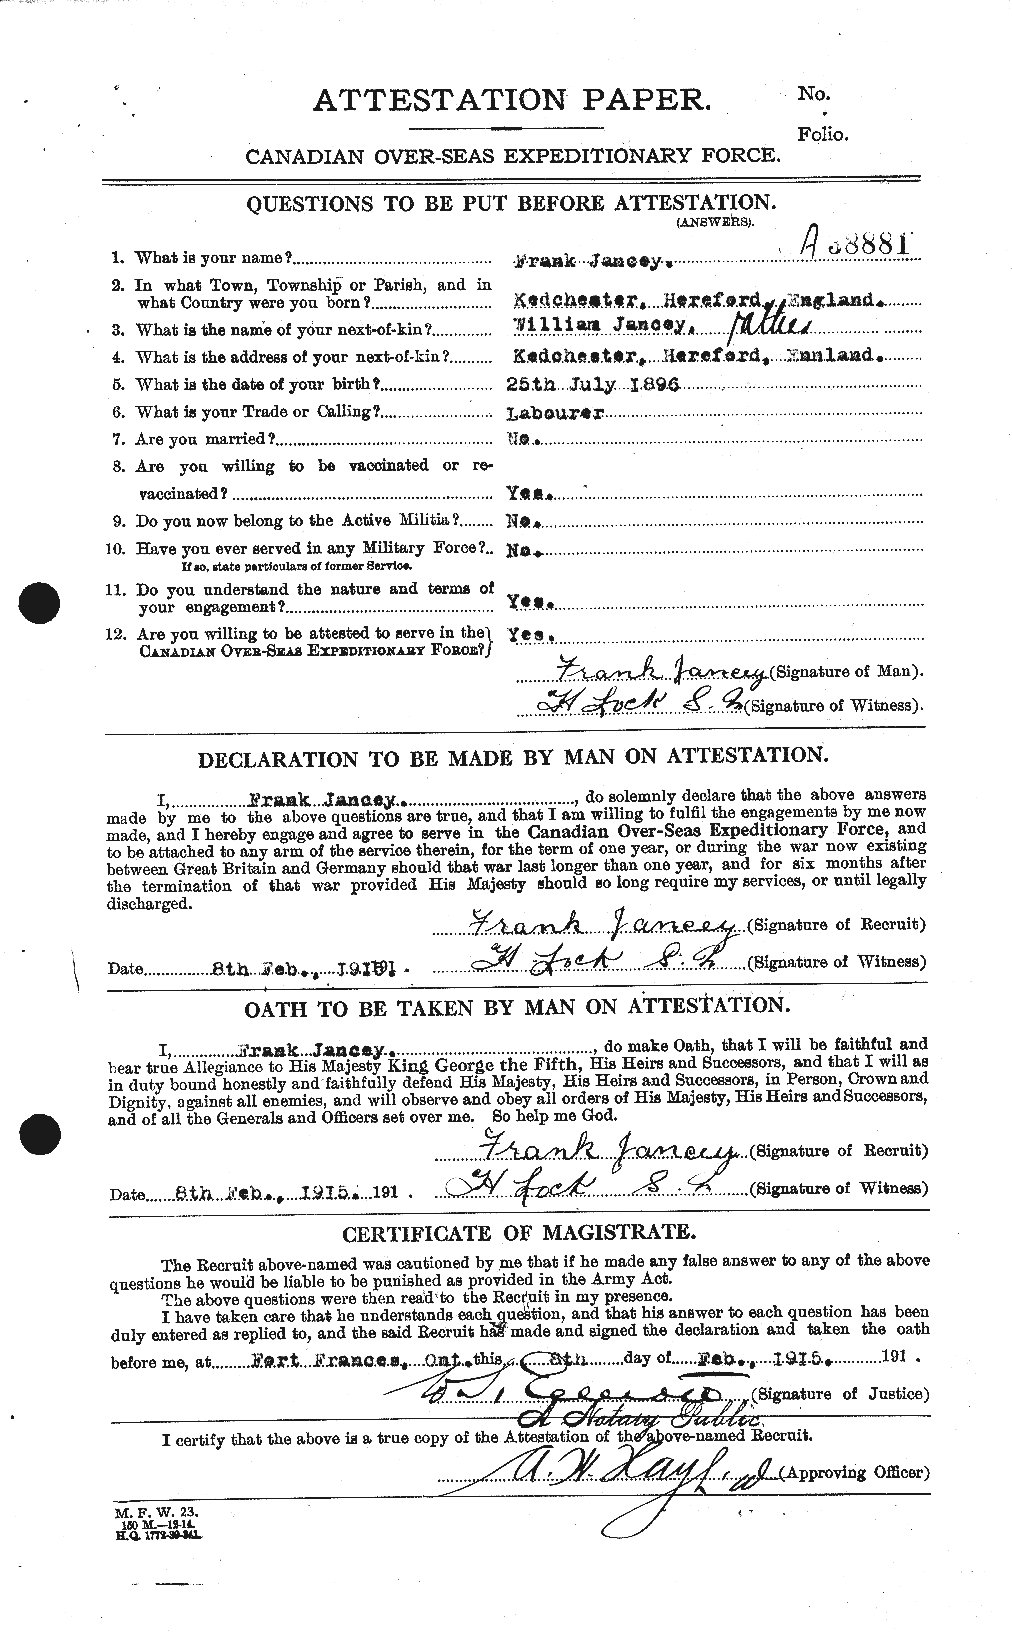 Personnel Records of the First World War - CEF 415336a